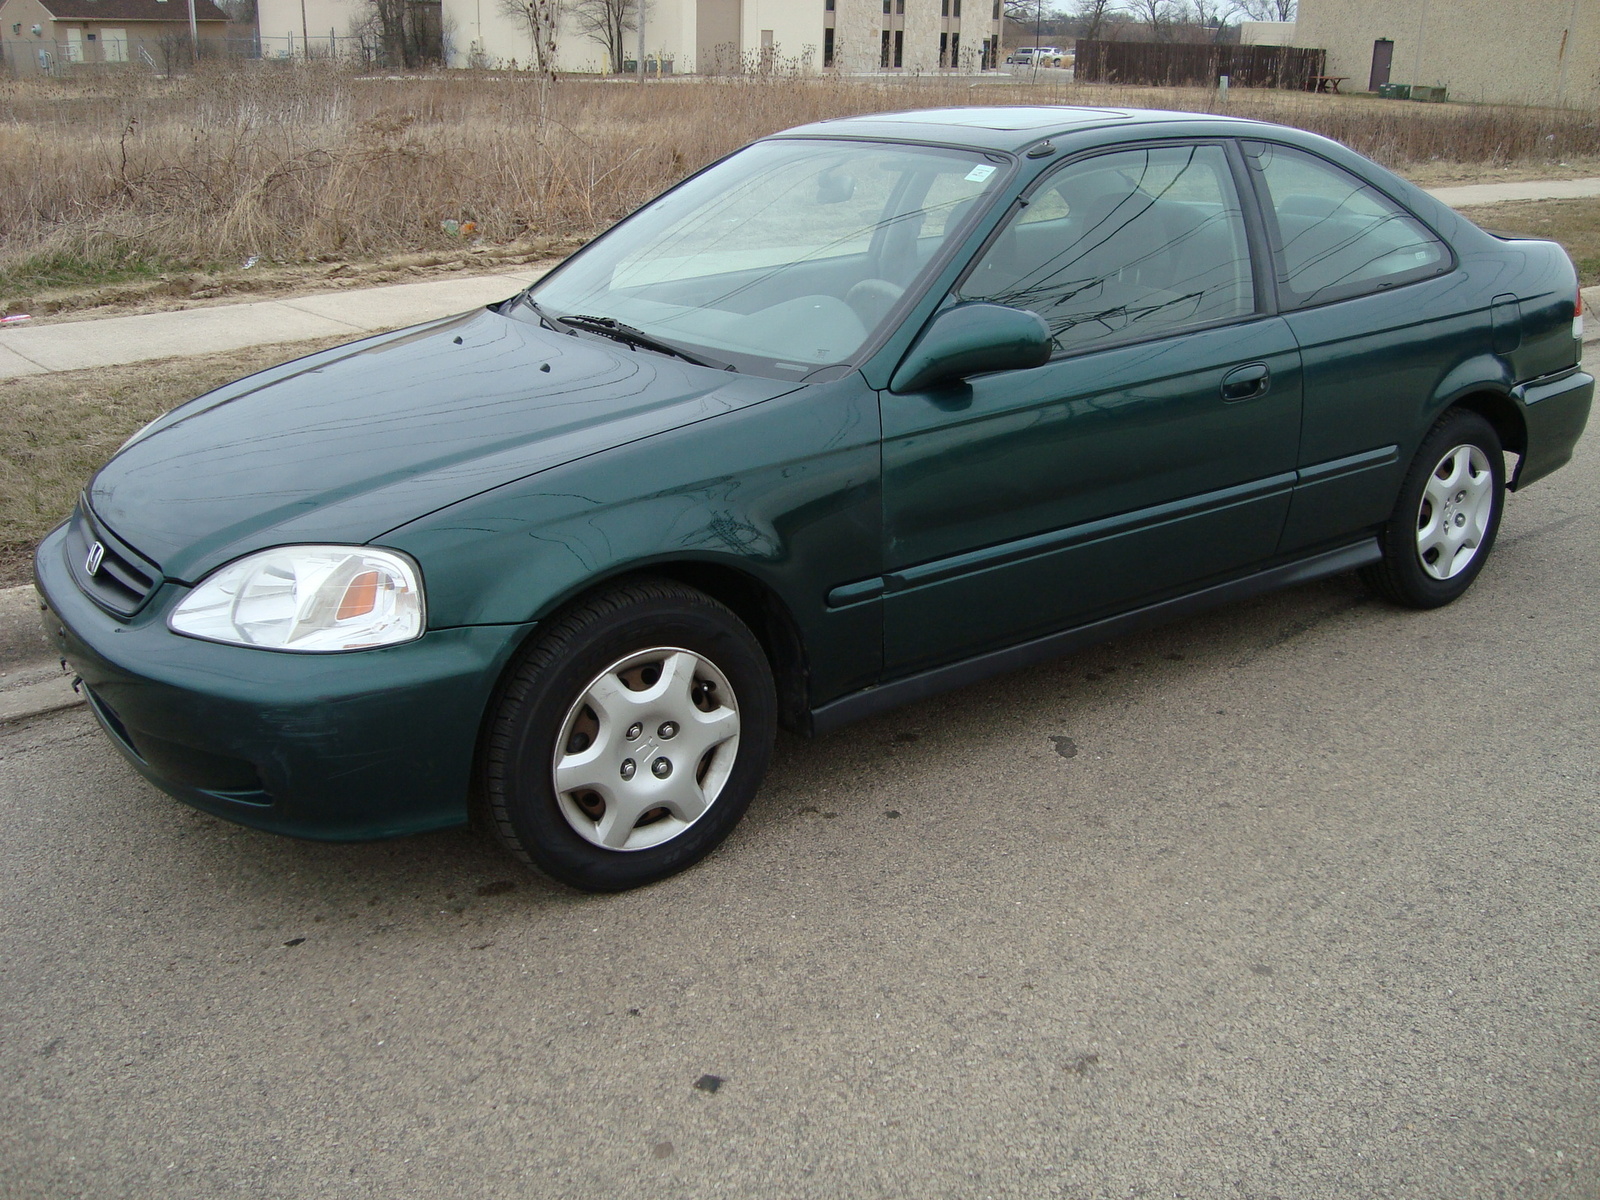 2000 Honda civic ex coupe specifications #3